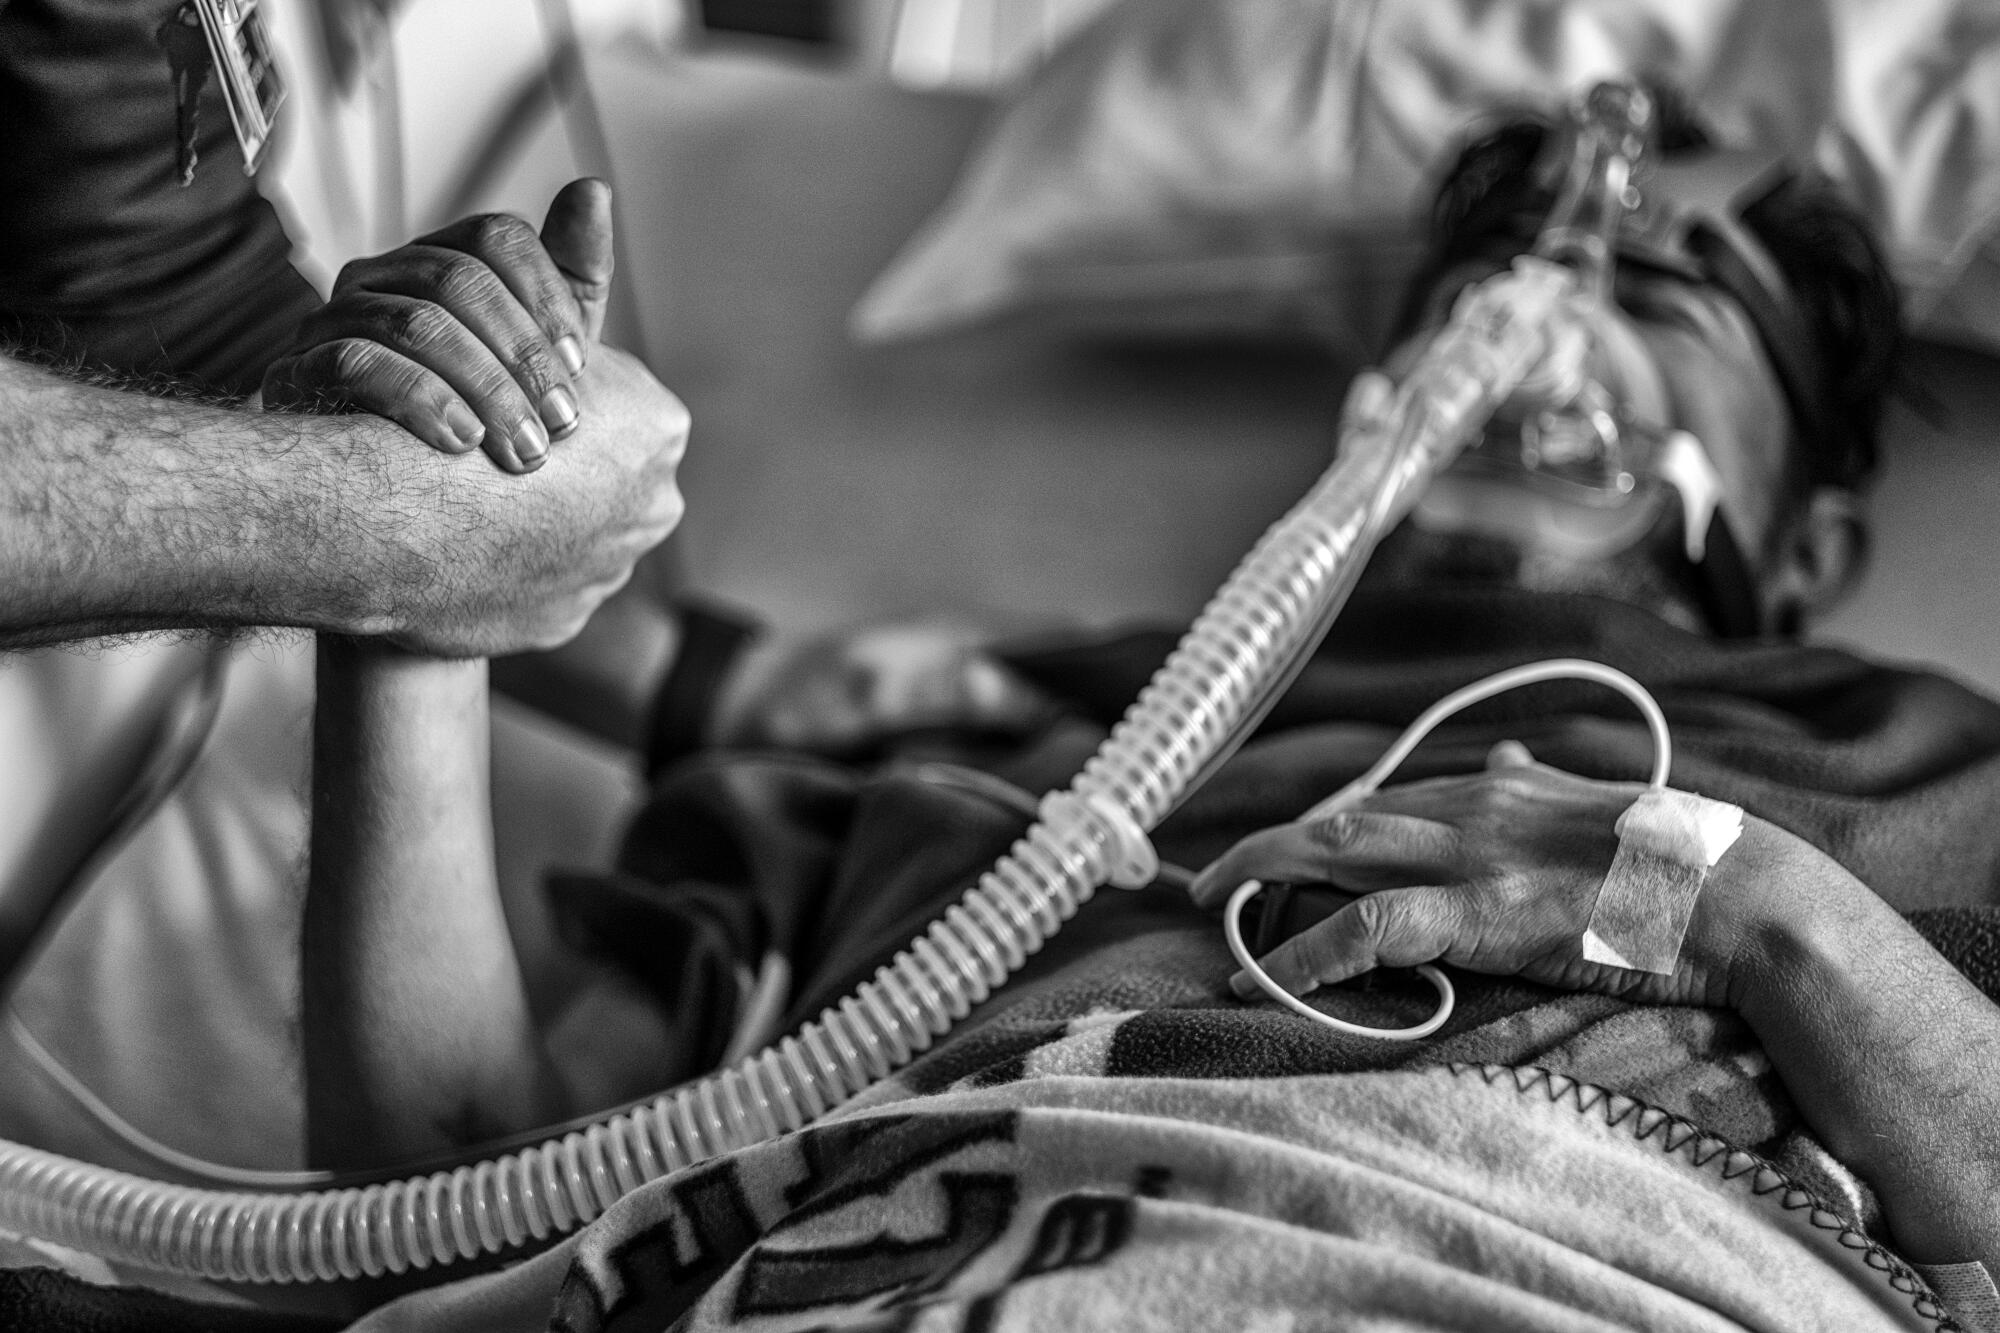 A black-and-white image of a hand reaching in from the left side holding a hand of a patient on respirator in a hospital bed